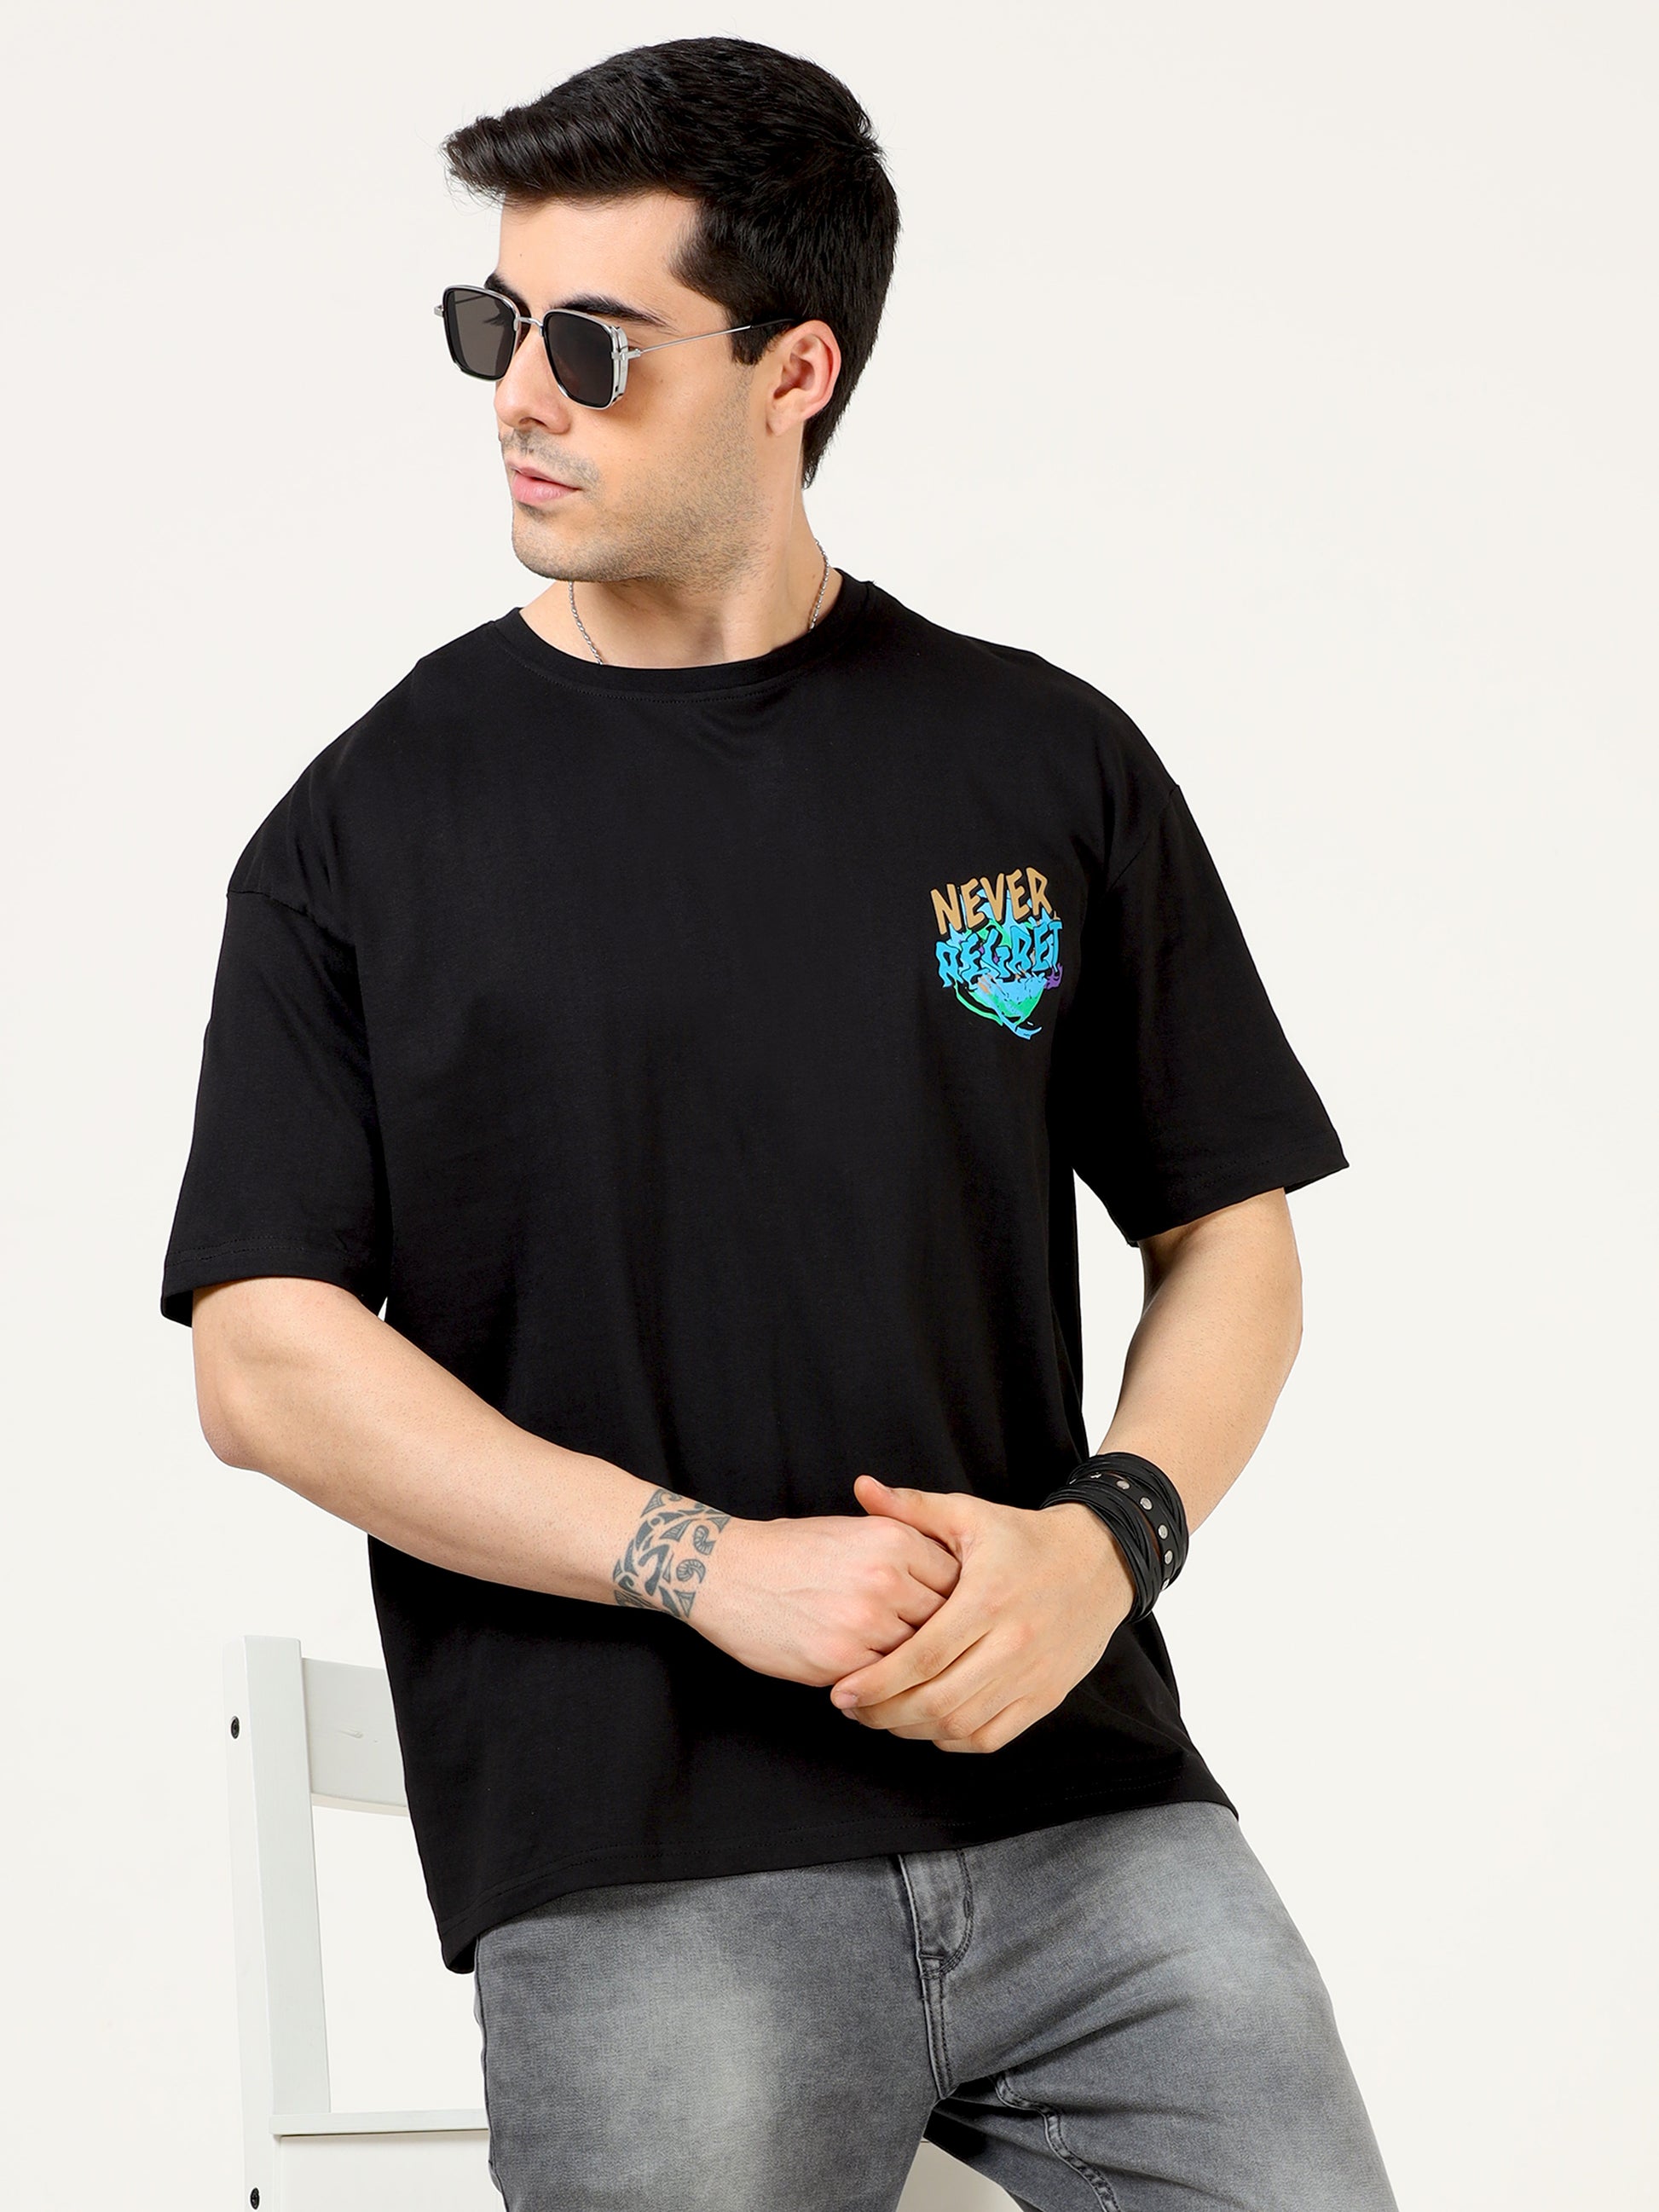 Buy Mens Oversized Tshirts online in India at Best Prices